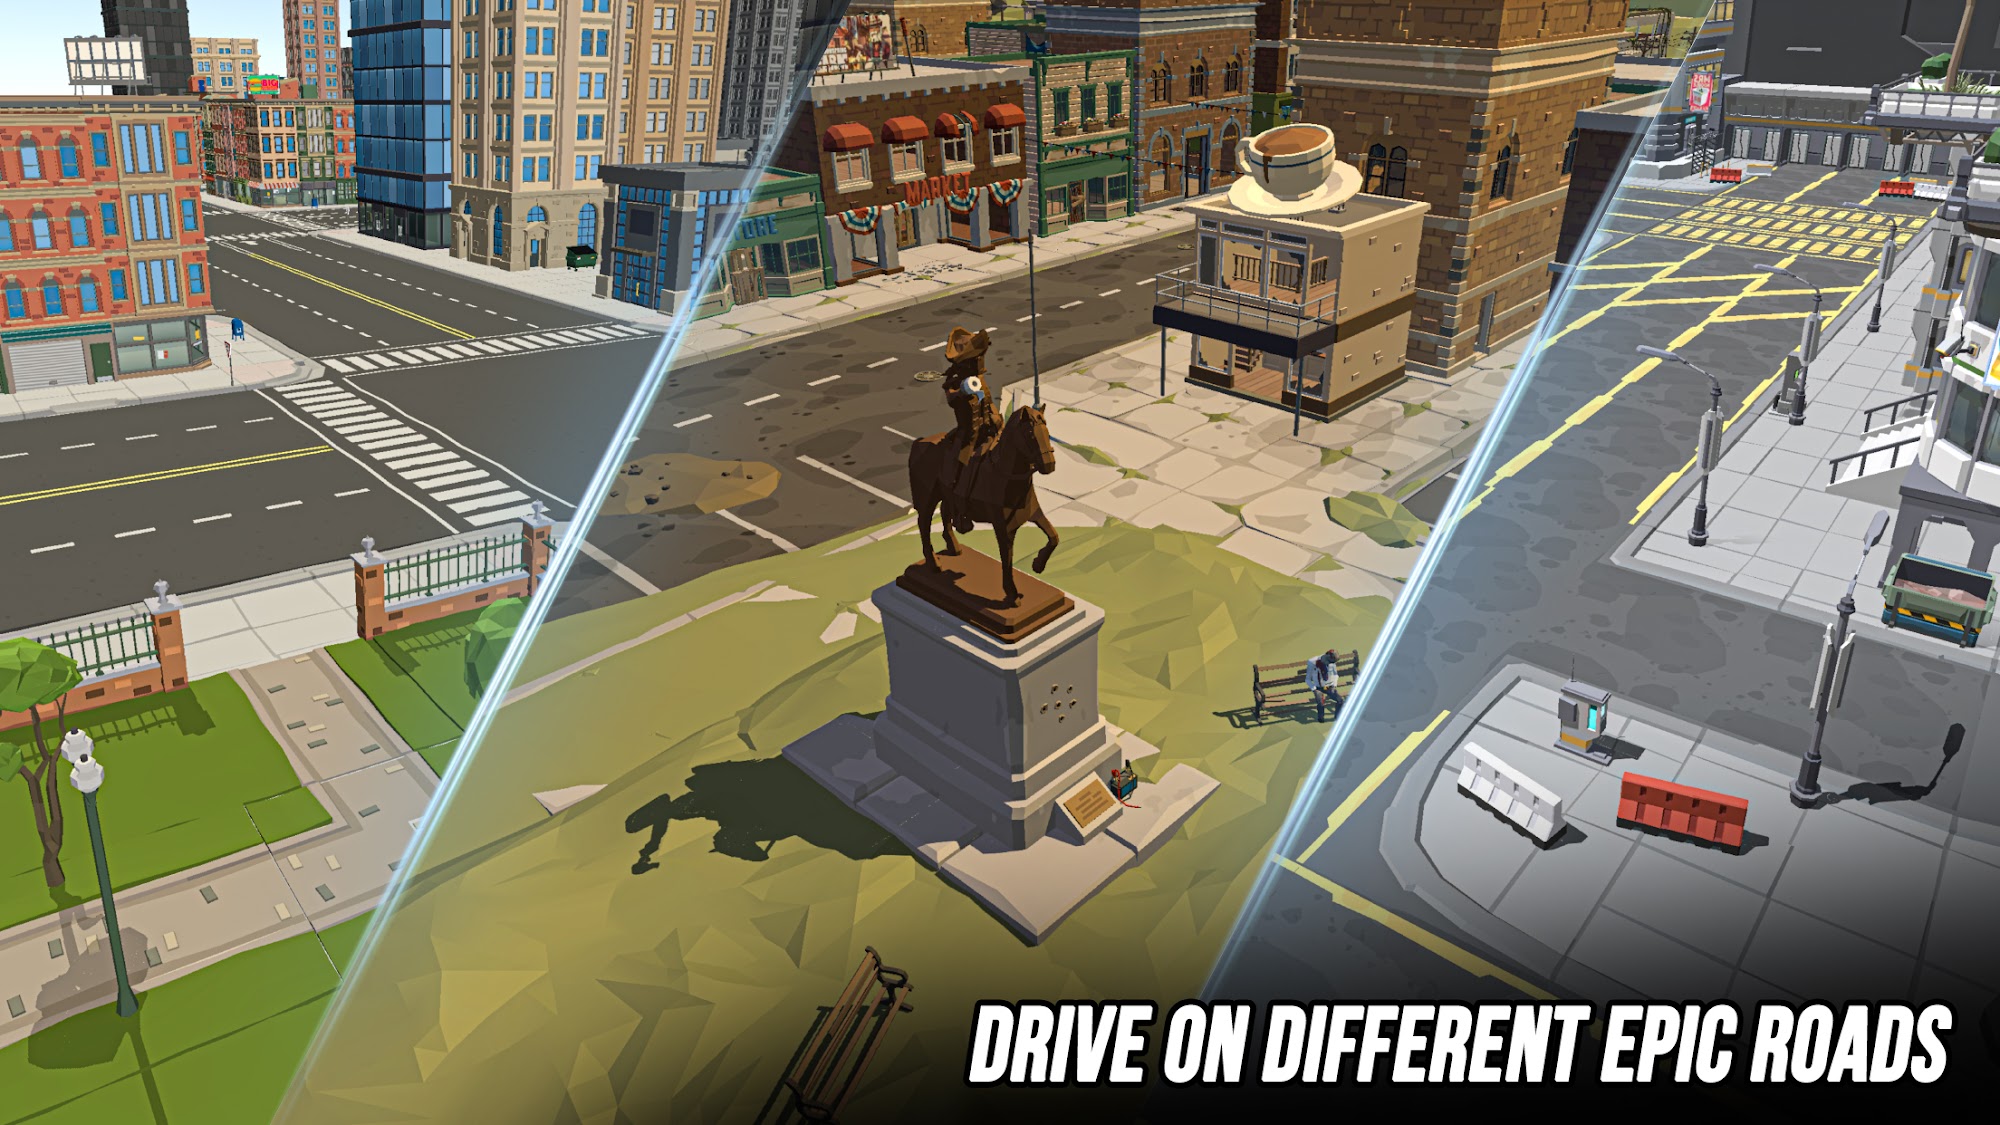 Download Chasing Fever: Car Chase Games für Android kostenlos.